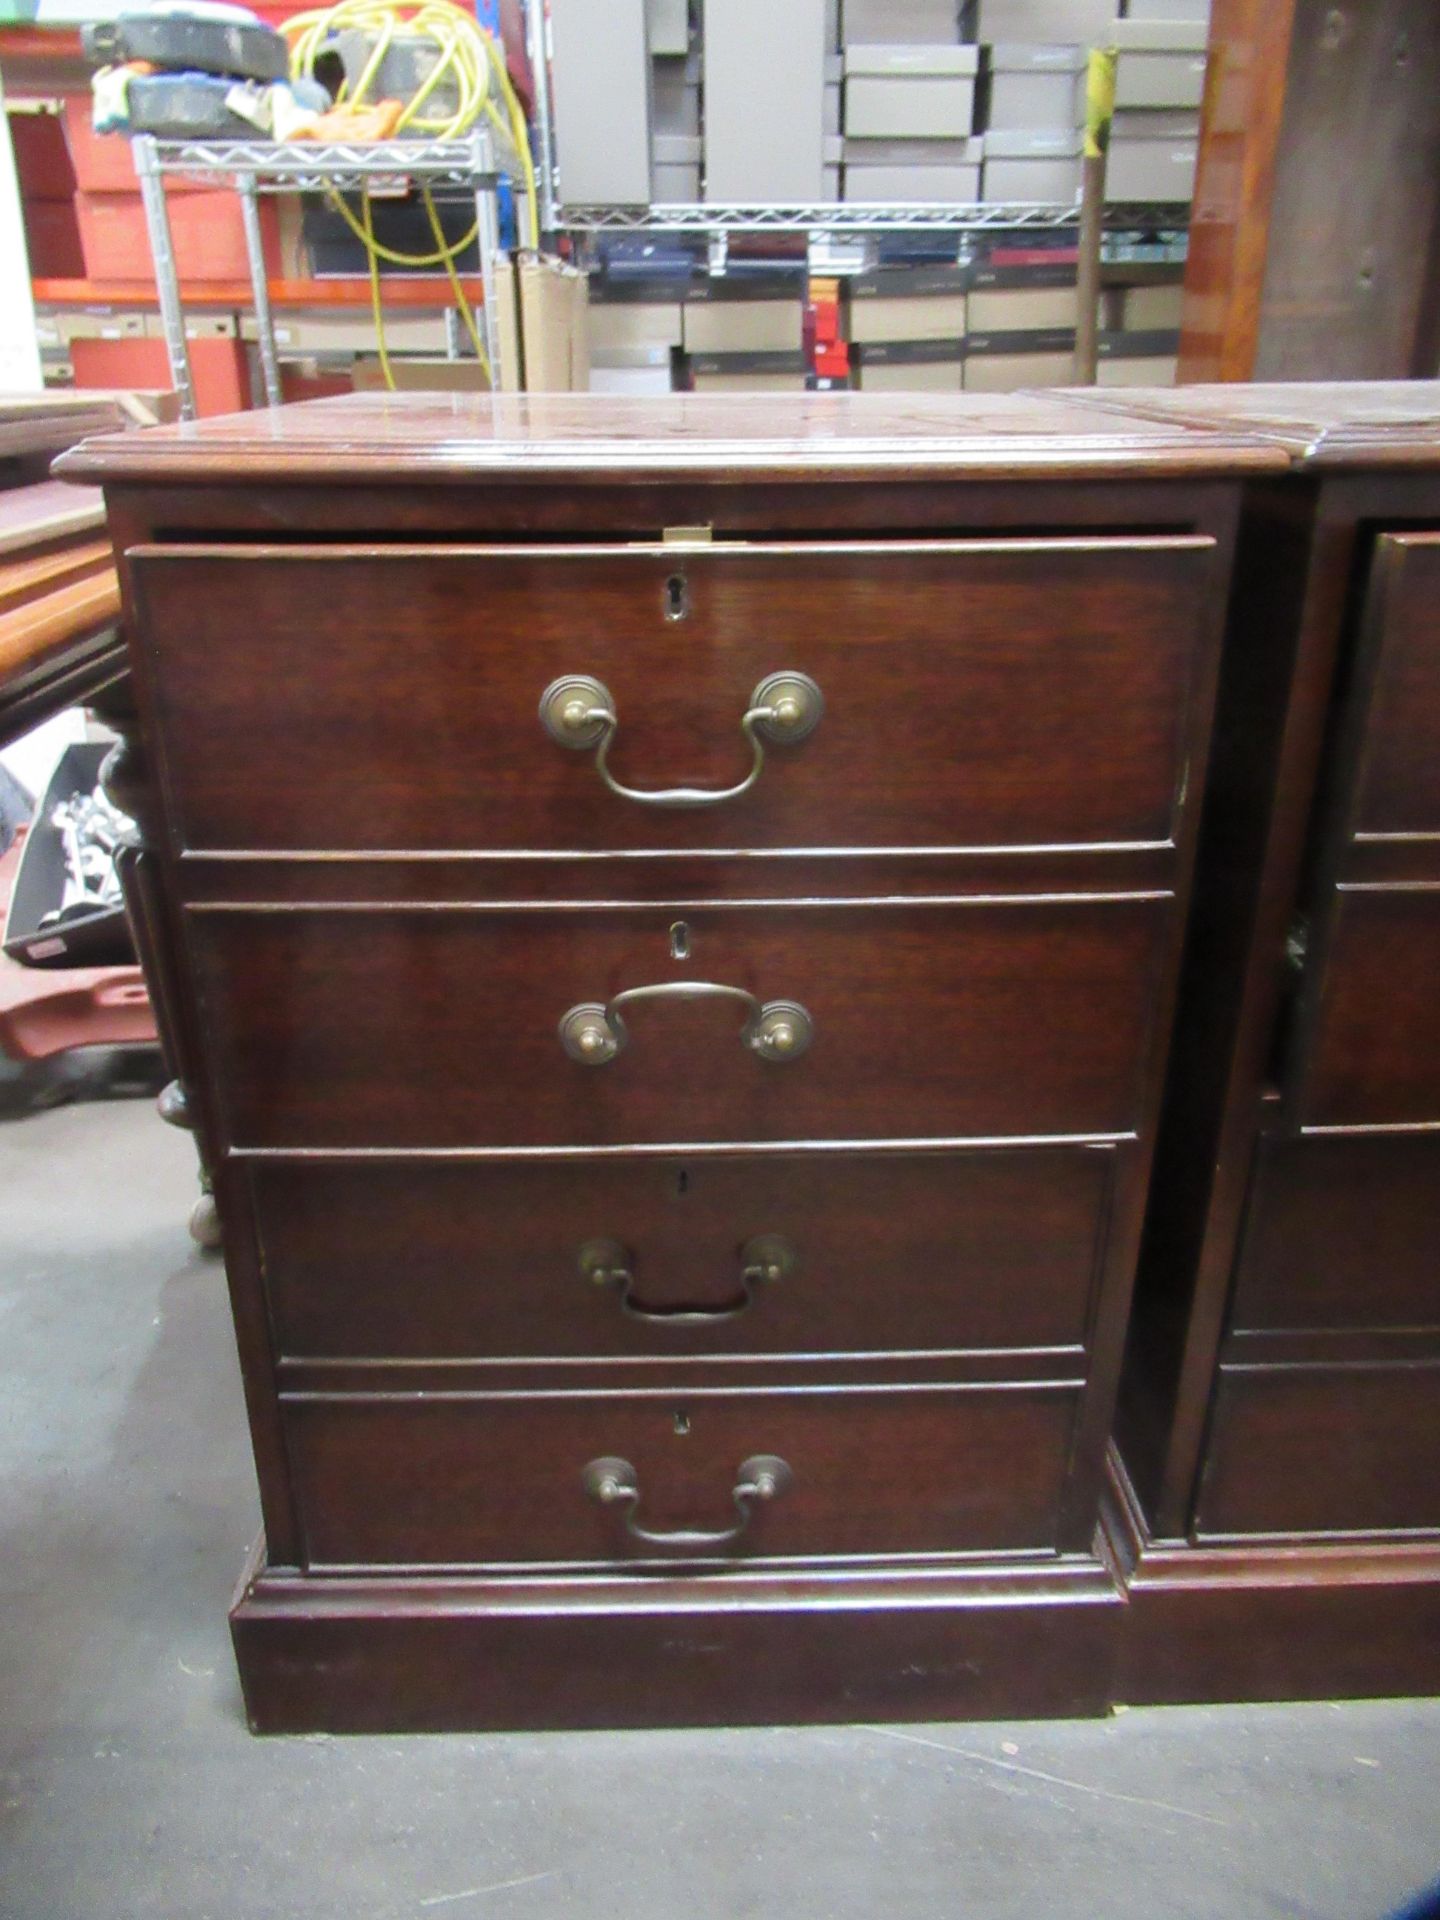 Two Double Drawer Mahogany Filing Cabinets - locked but open - no keys - Image 2 of 5